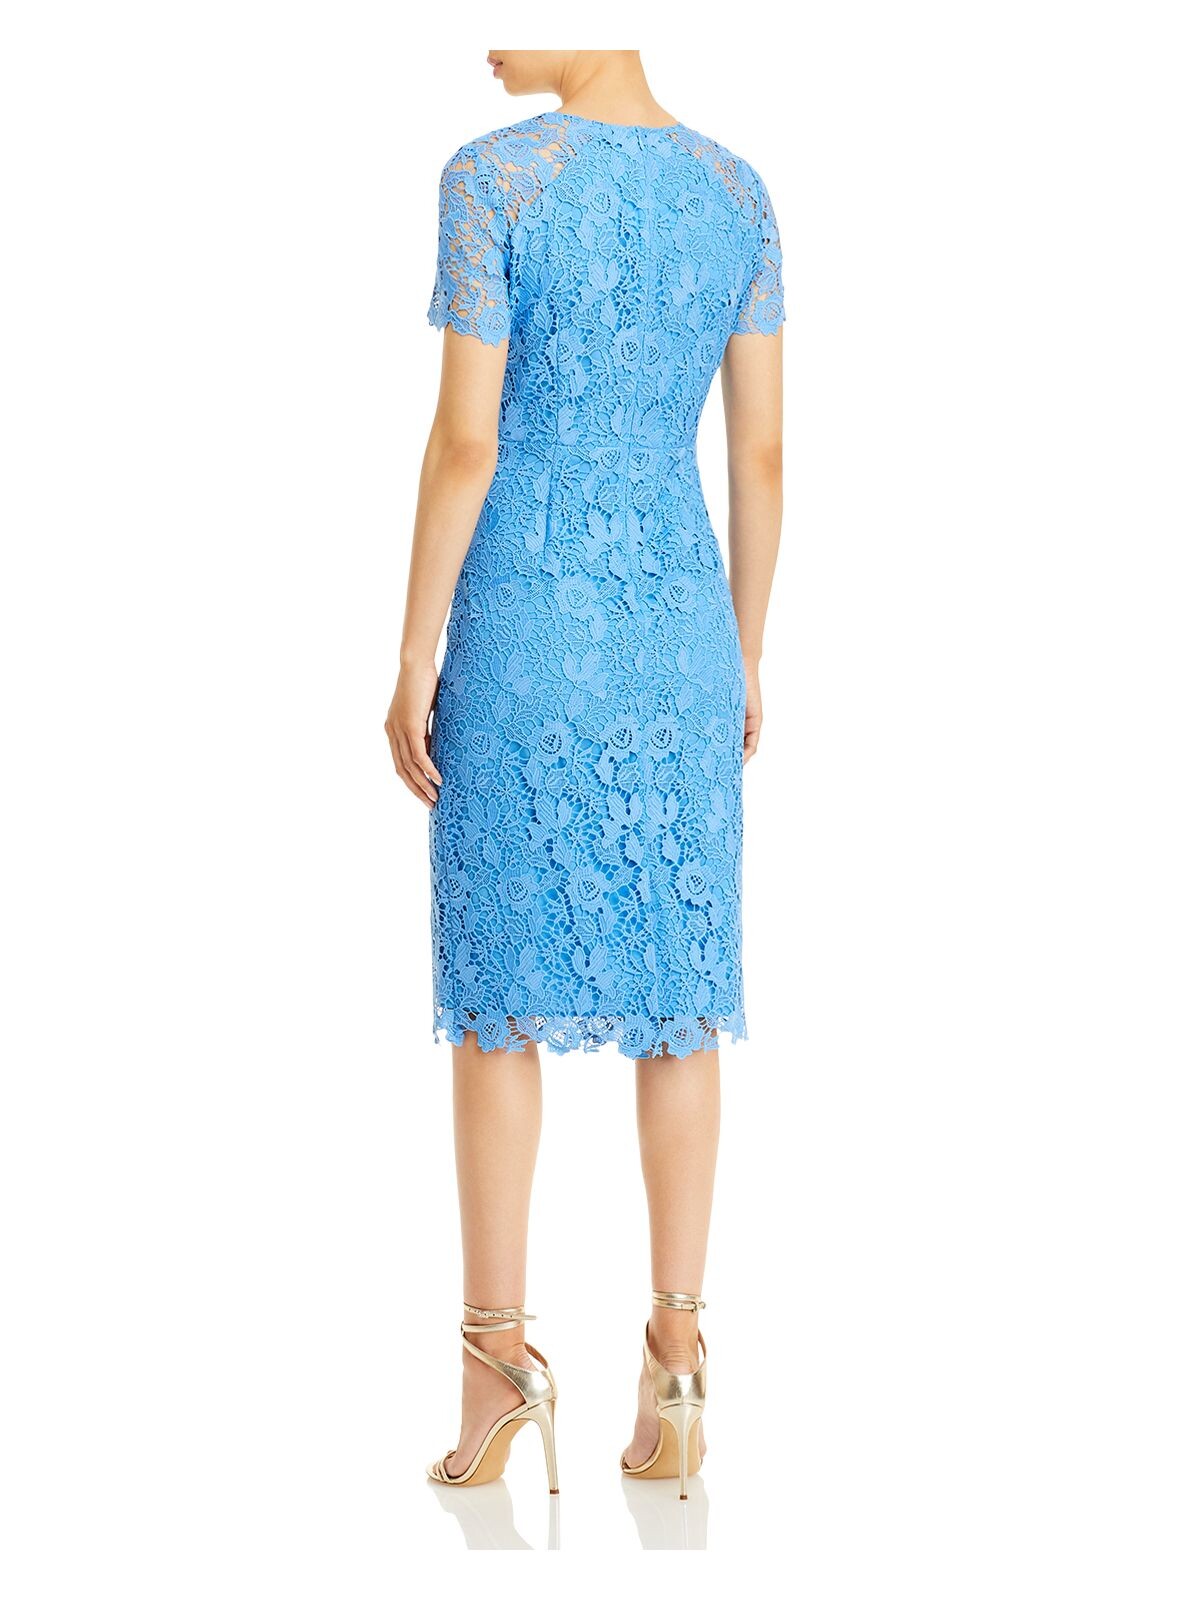 ELIZA J Womens Blue Lace Zippered Fitted Lined Short Sleeve Crew Neck Below The Knee Formal Sheath Dress 6